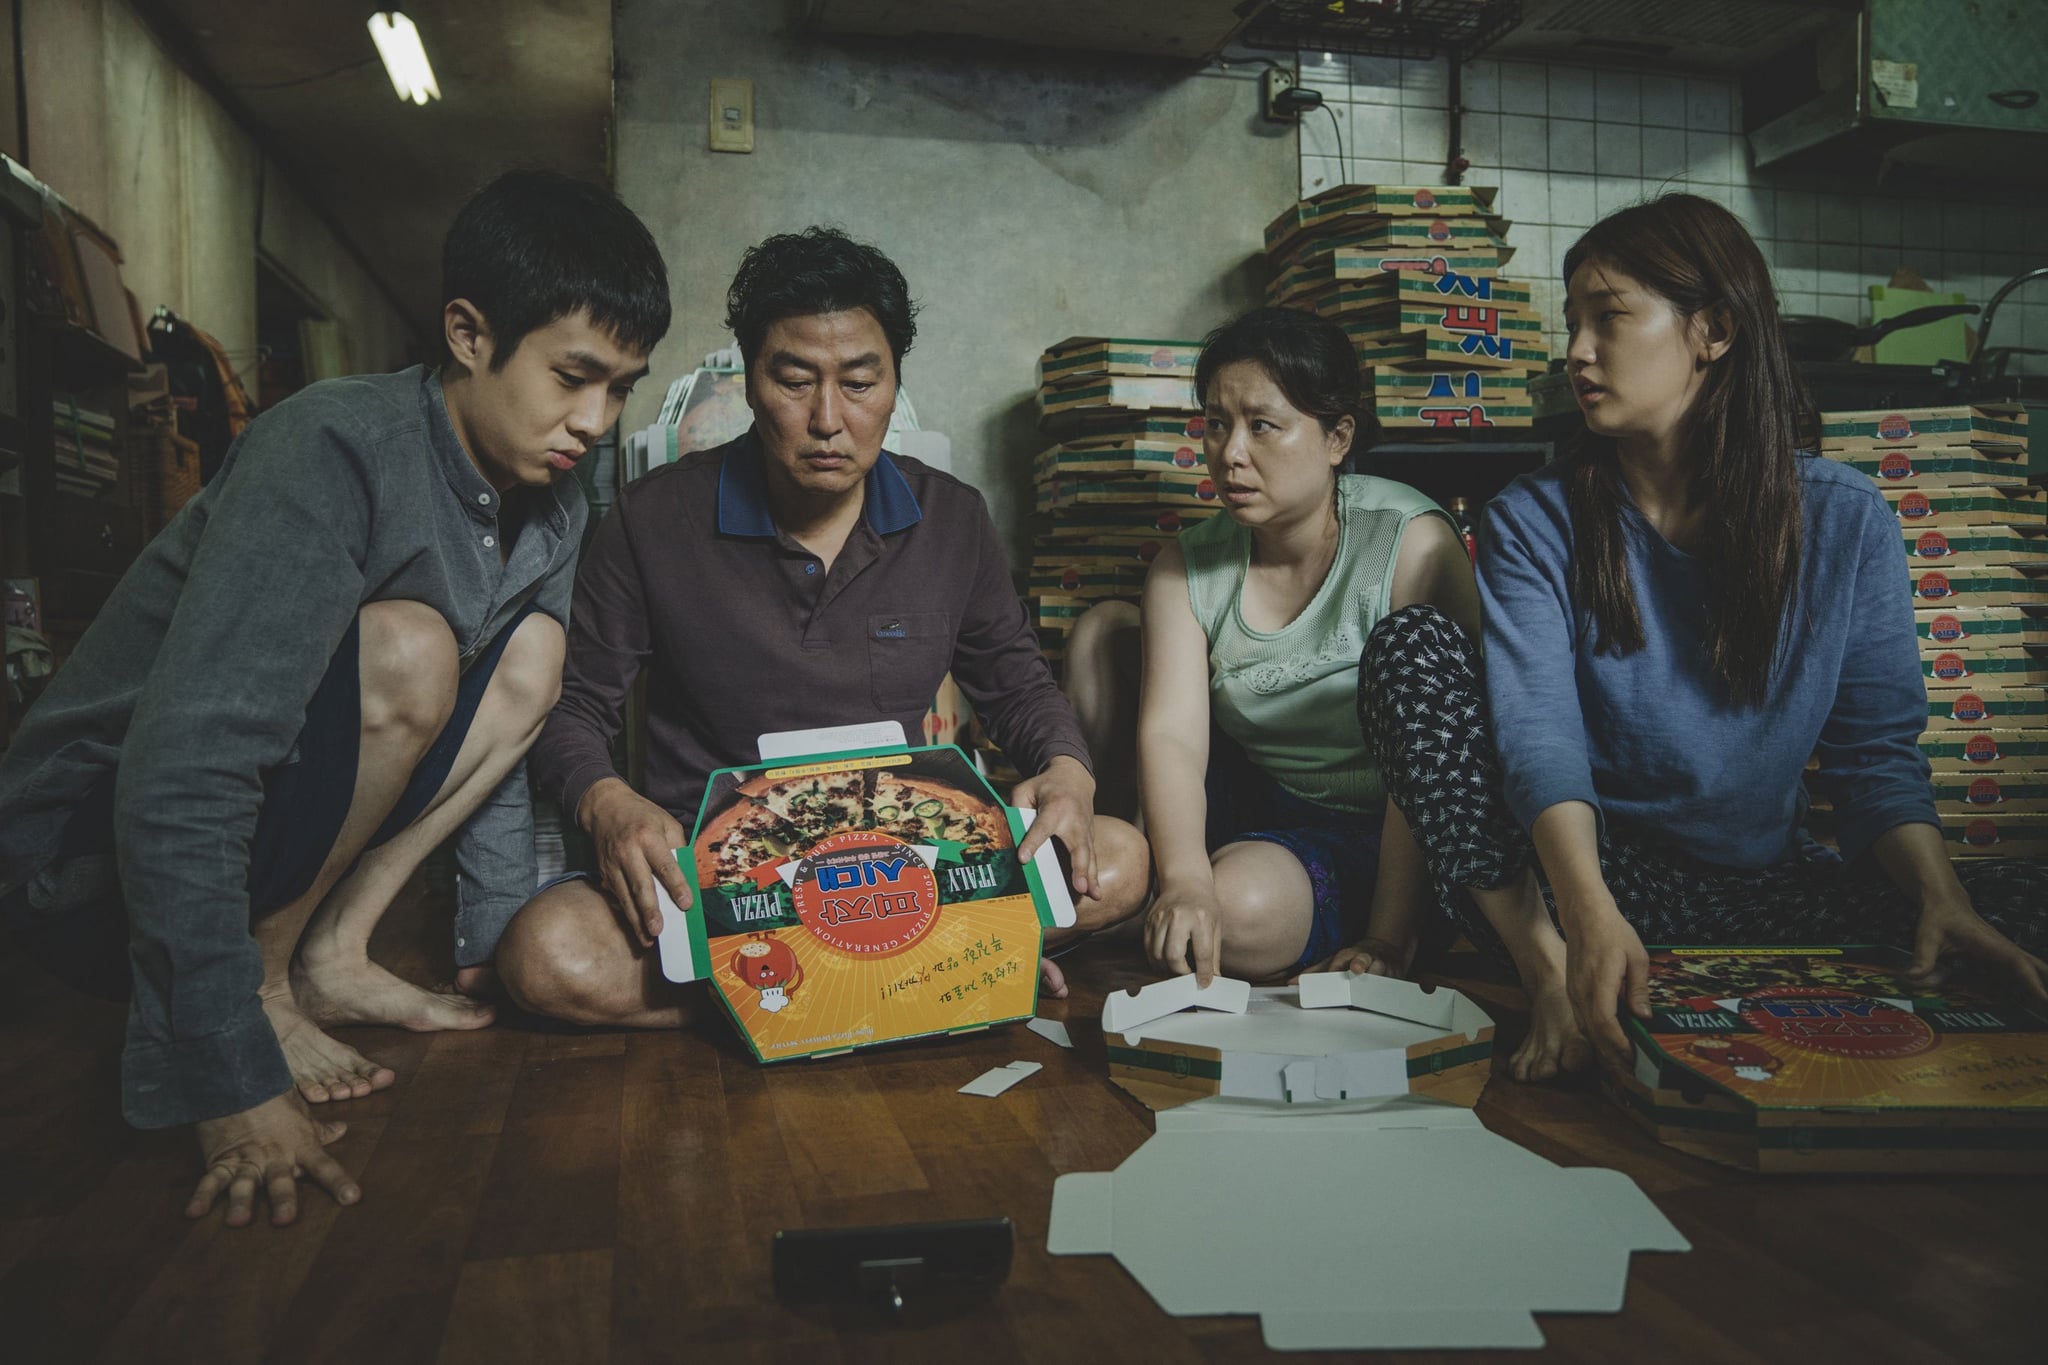 PARASITE, from left: CHOI Woo-sik, SONG Kang-ho, JANG Hye-jin, PARK So-dam, 2019.  Neon / courtesy Everett Collection